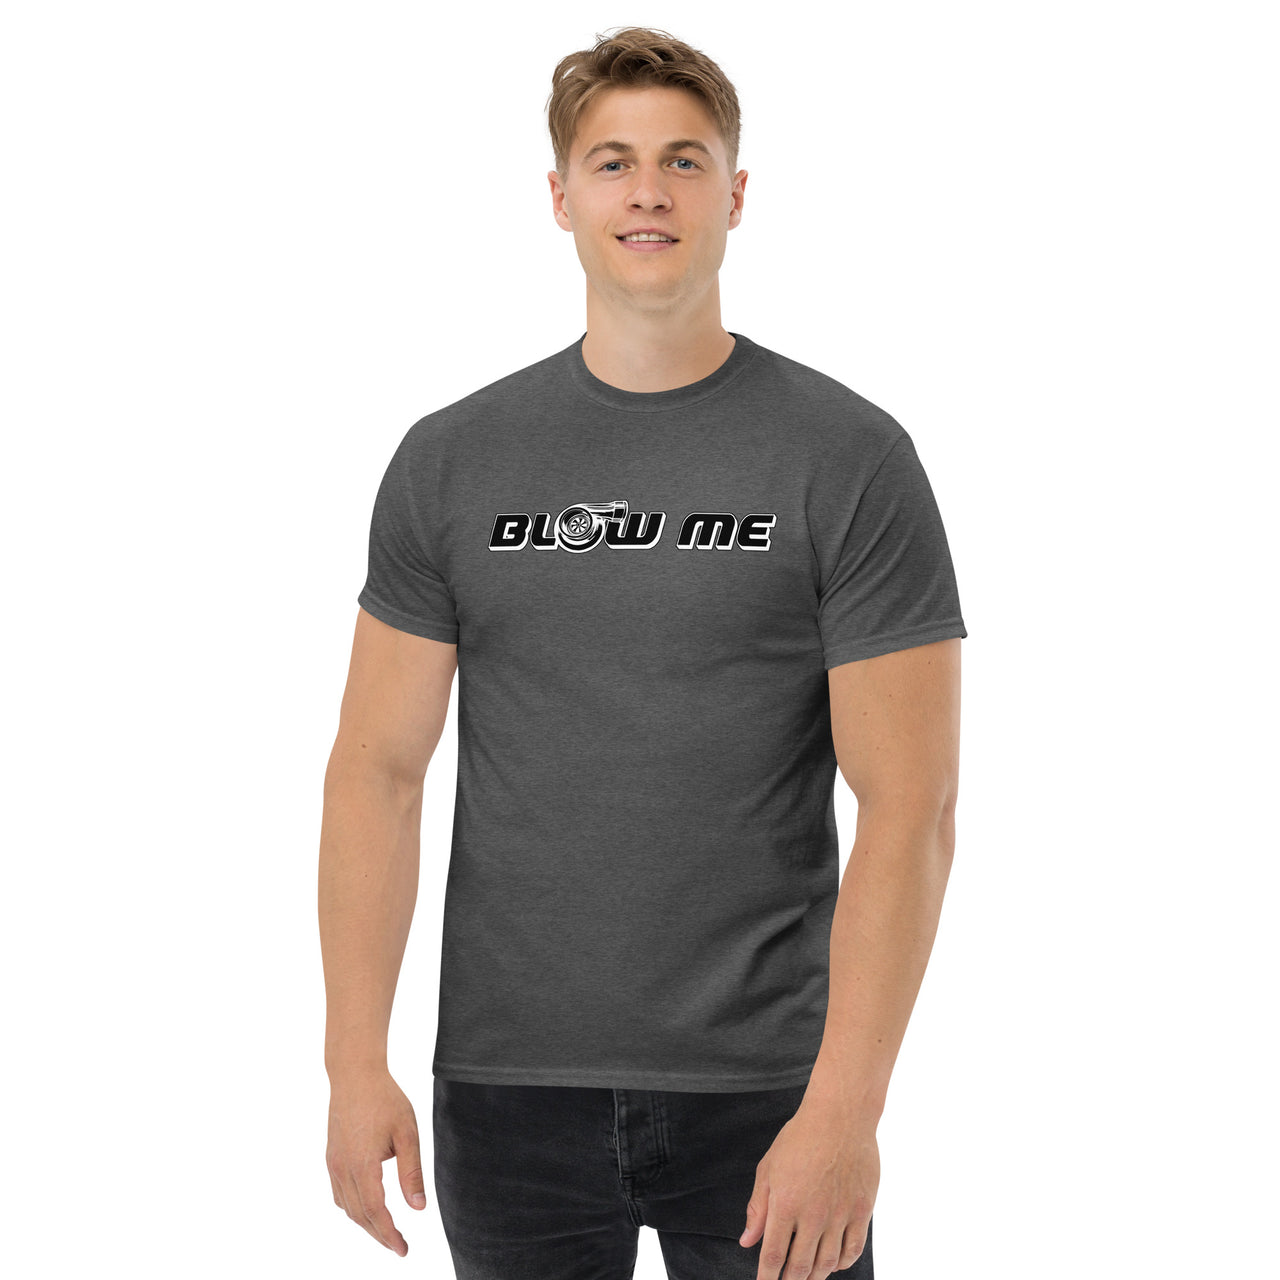 Funny Car Enthusiast Blow Me Turbo T-Shirt modeled in grey